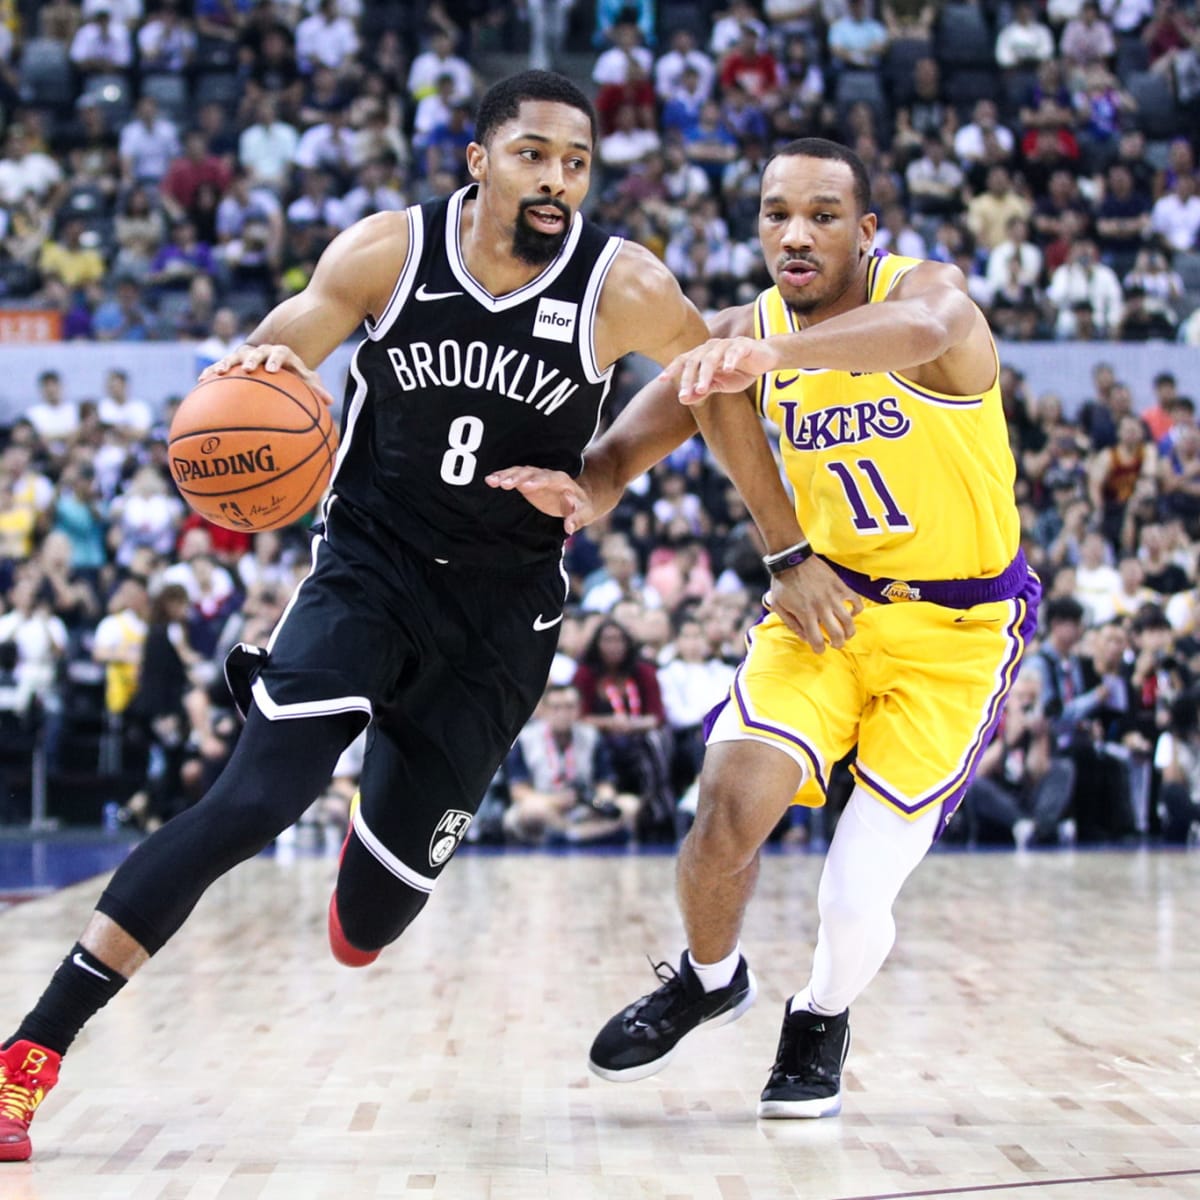 NBA Trade Rumors: Re-exploring summer trade options with the Brooklyn Nets  - The Dream Shake